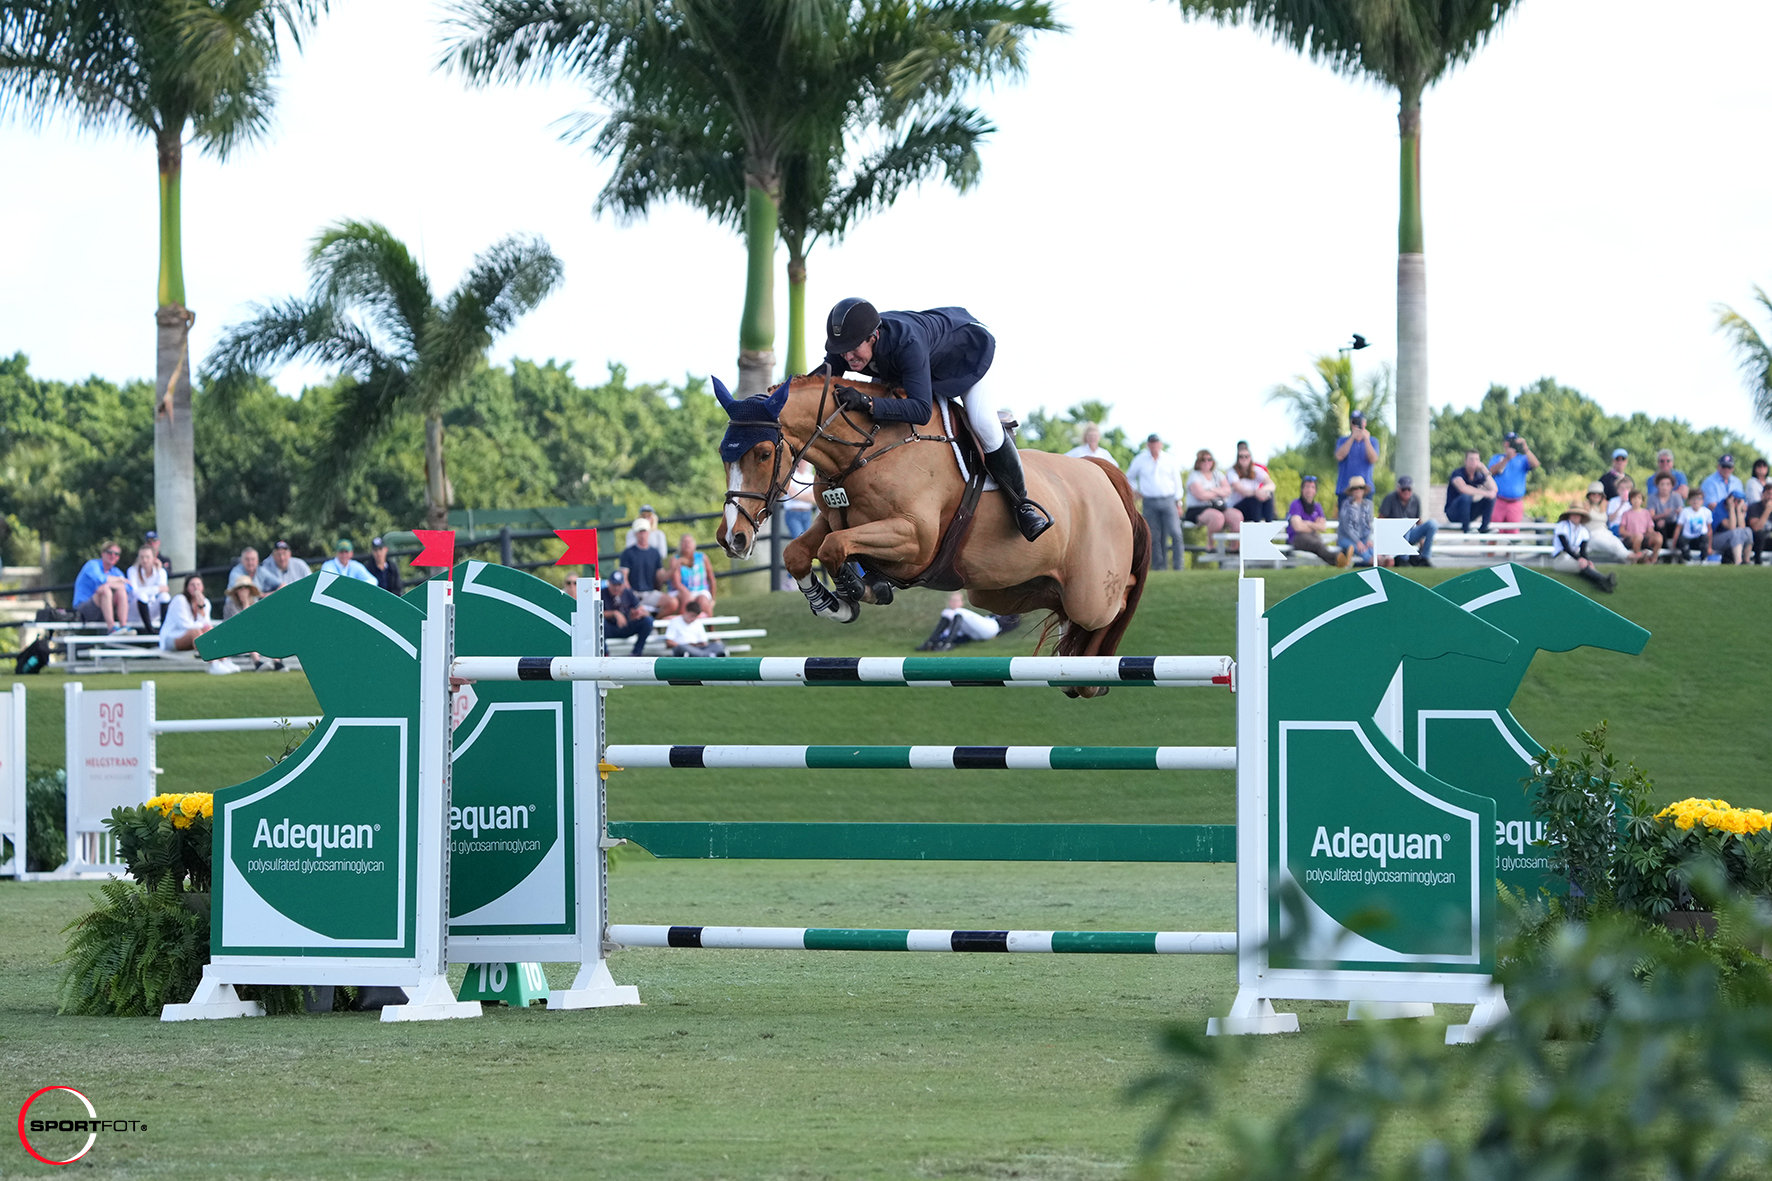 McLain Ward Saves the Best for Last in $50,000 Adequan® WEF Challenge Cup Round IV CSI4* Victory